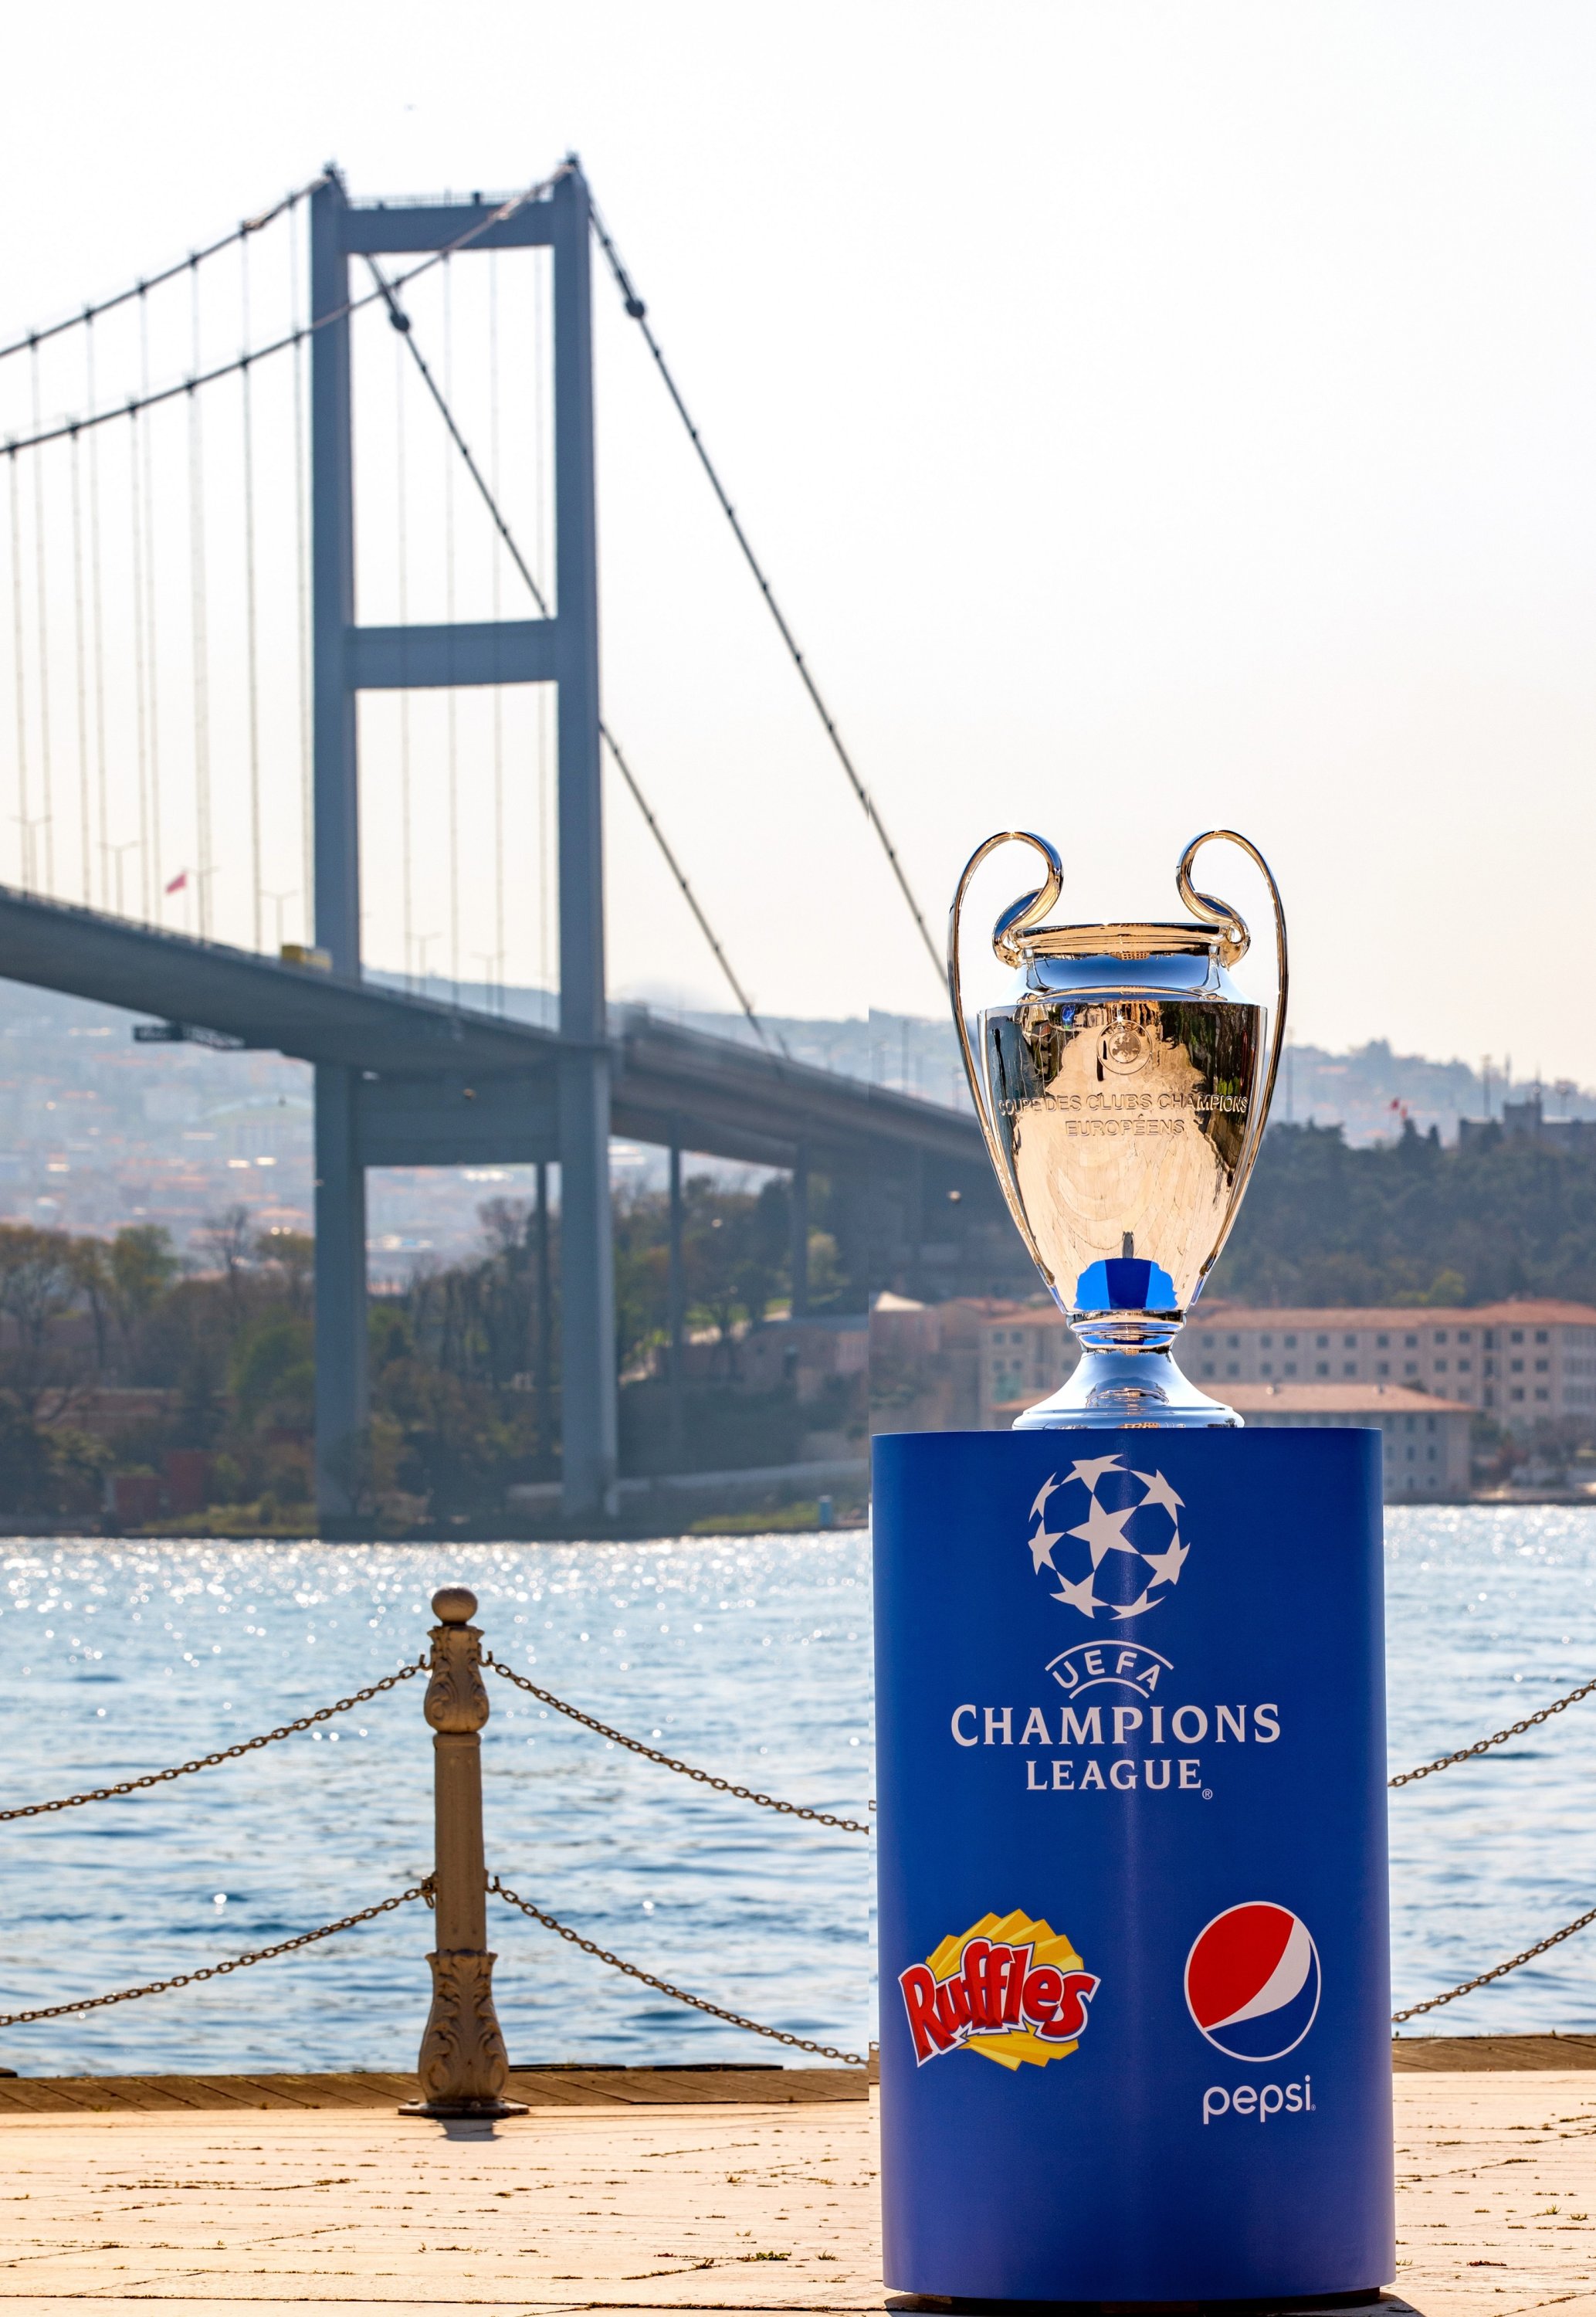 Istanbul to host Champions League final in 2023 on Turkey's